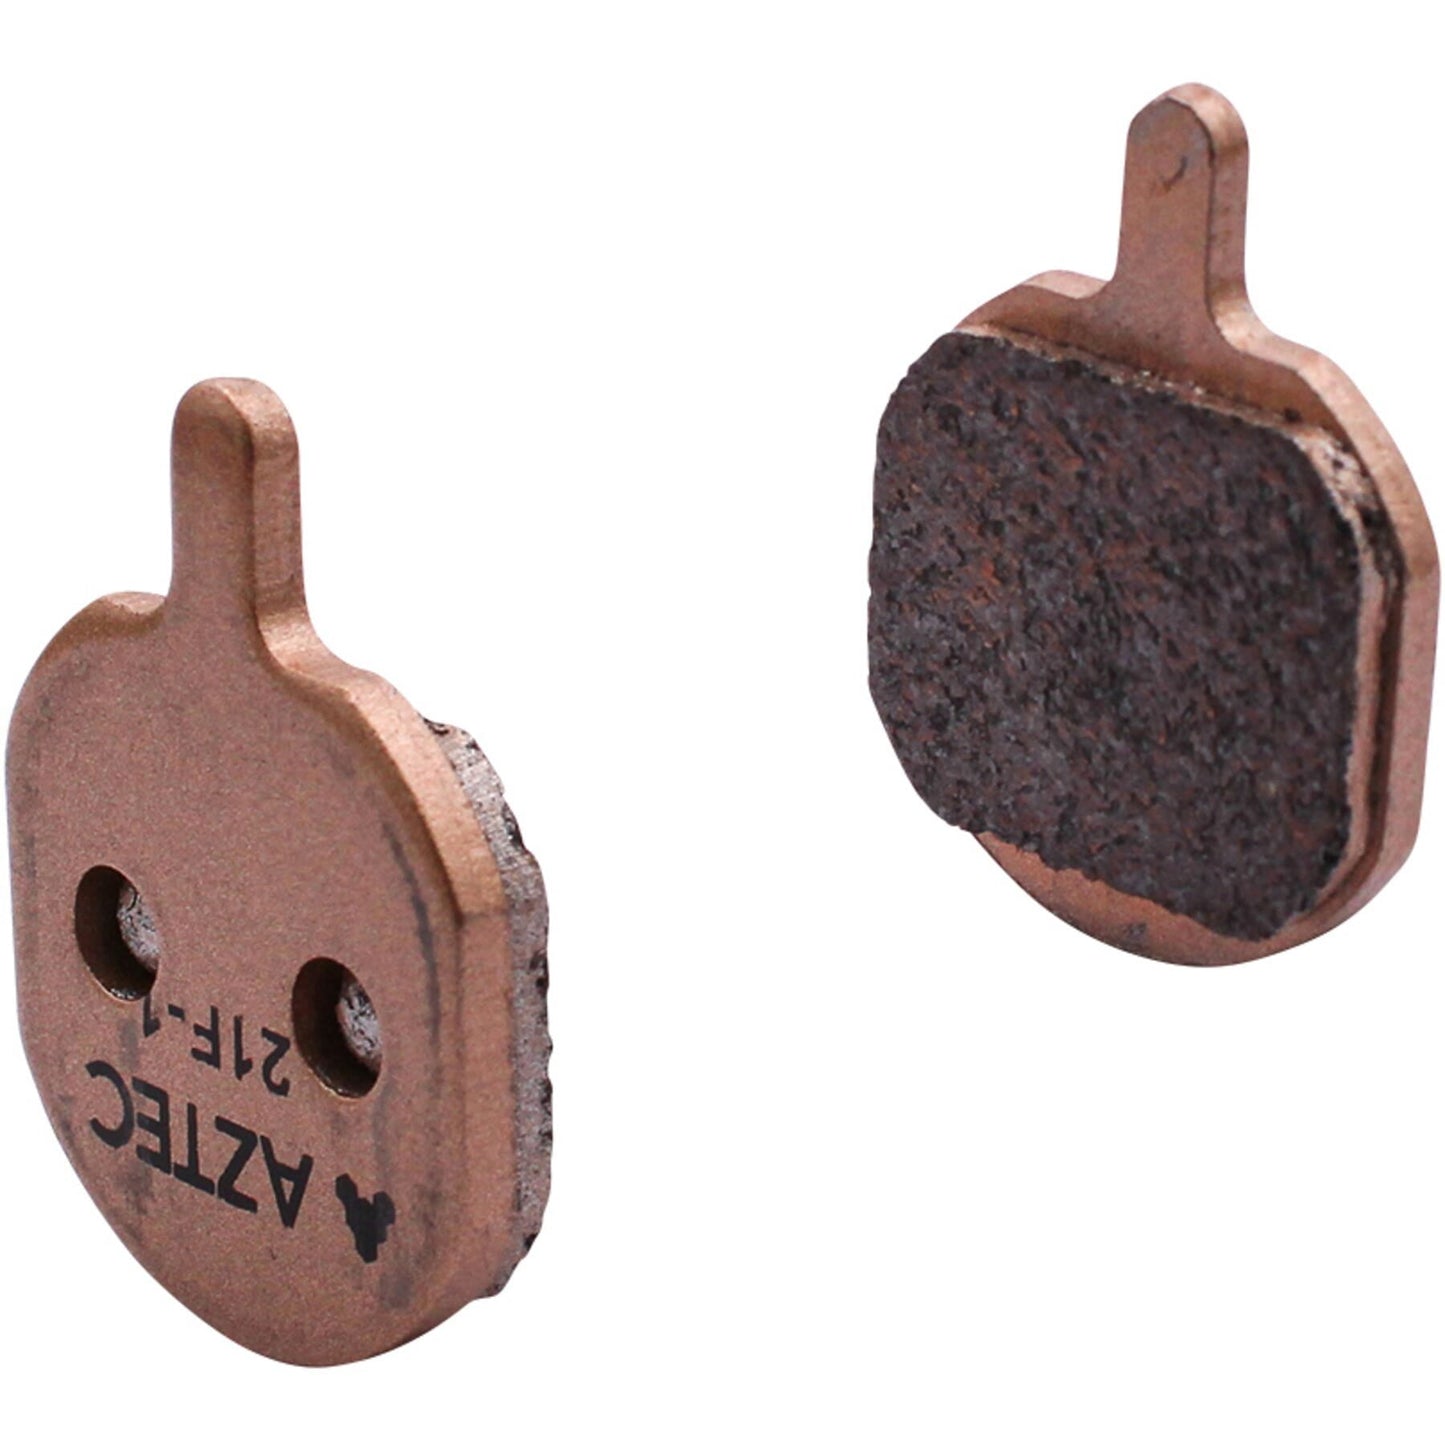 Sintered Disc Brake Pads For Hayes So1e Callipers